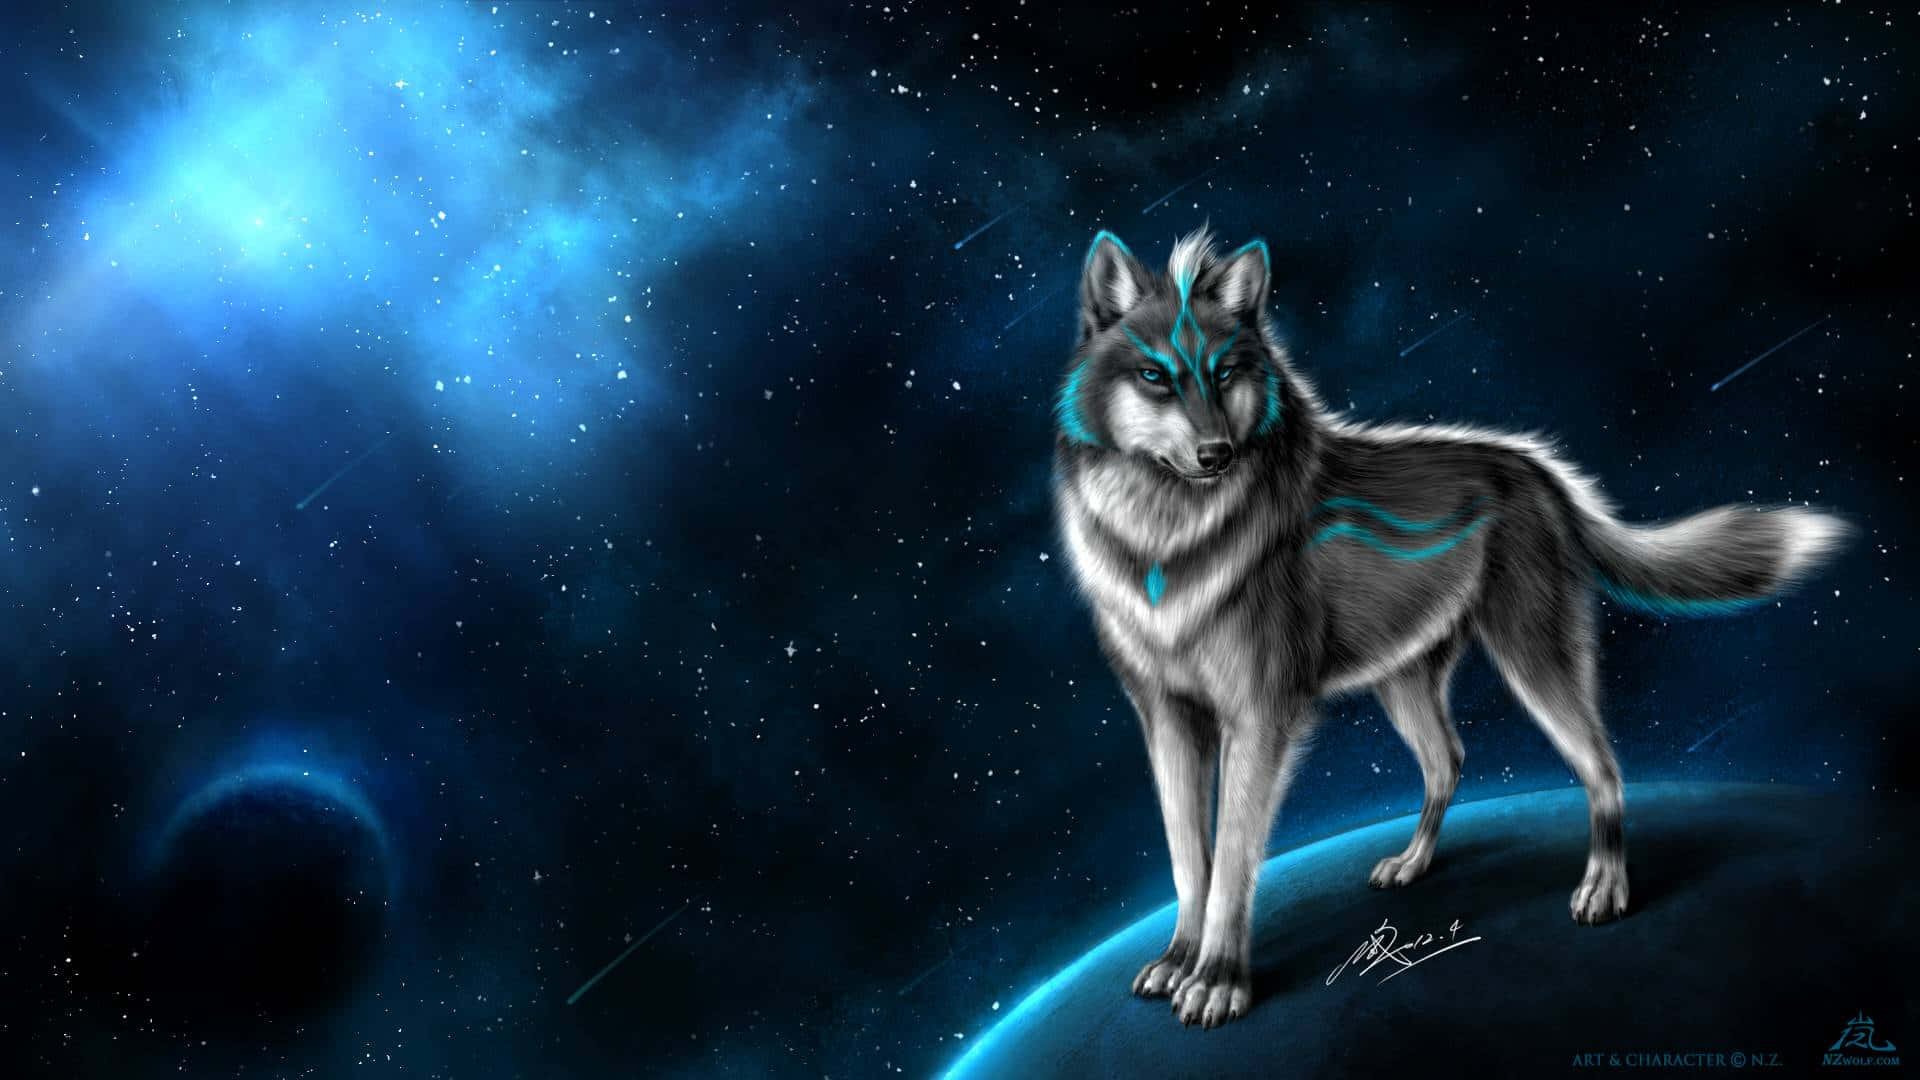 Stay Chill With Super Cool Wolf! Wallpaper